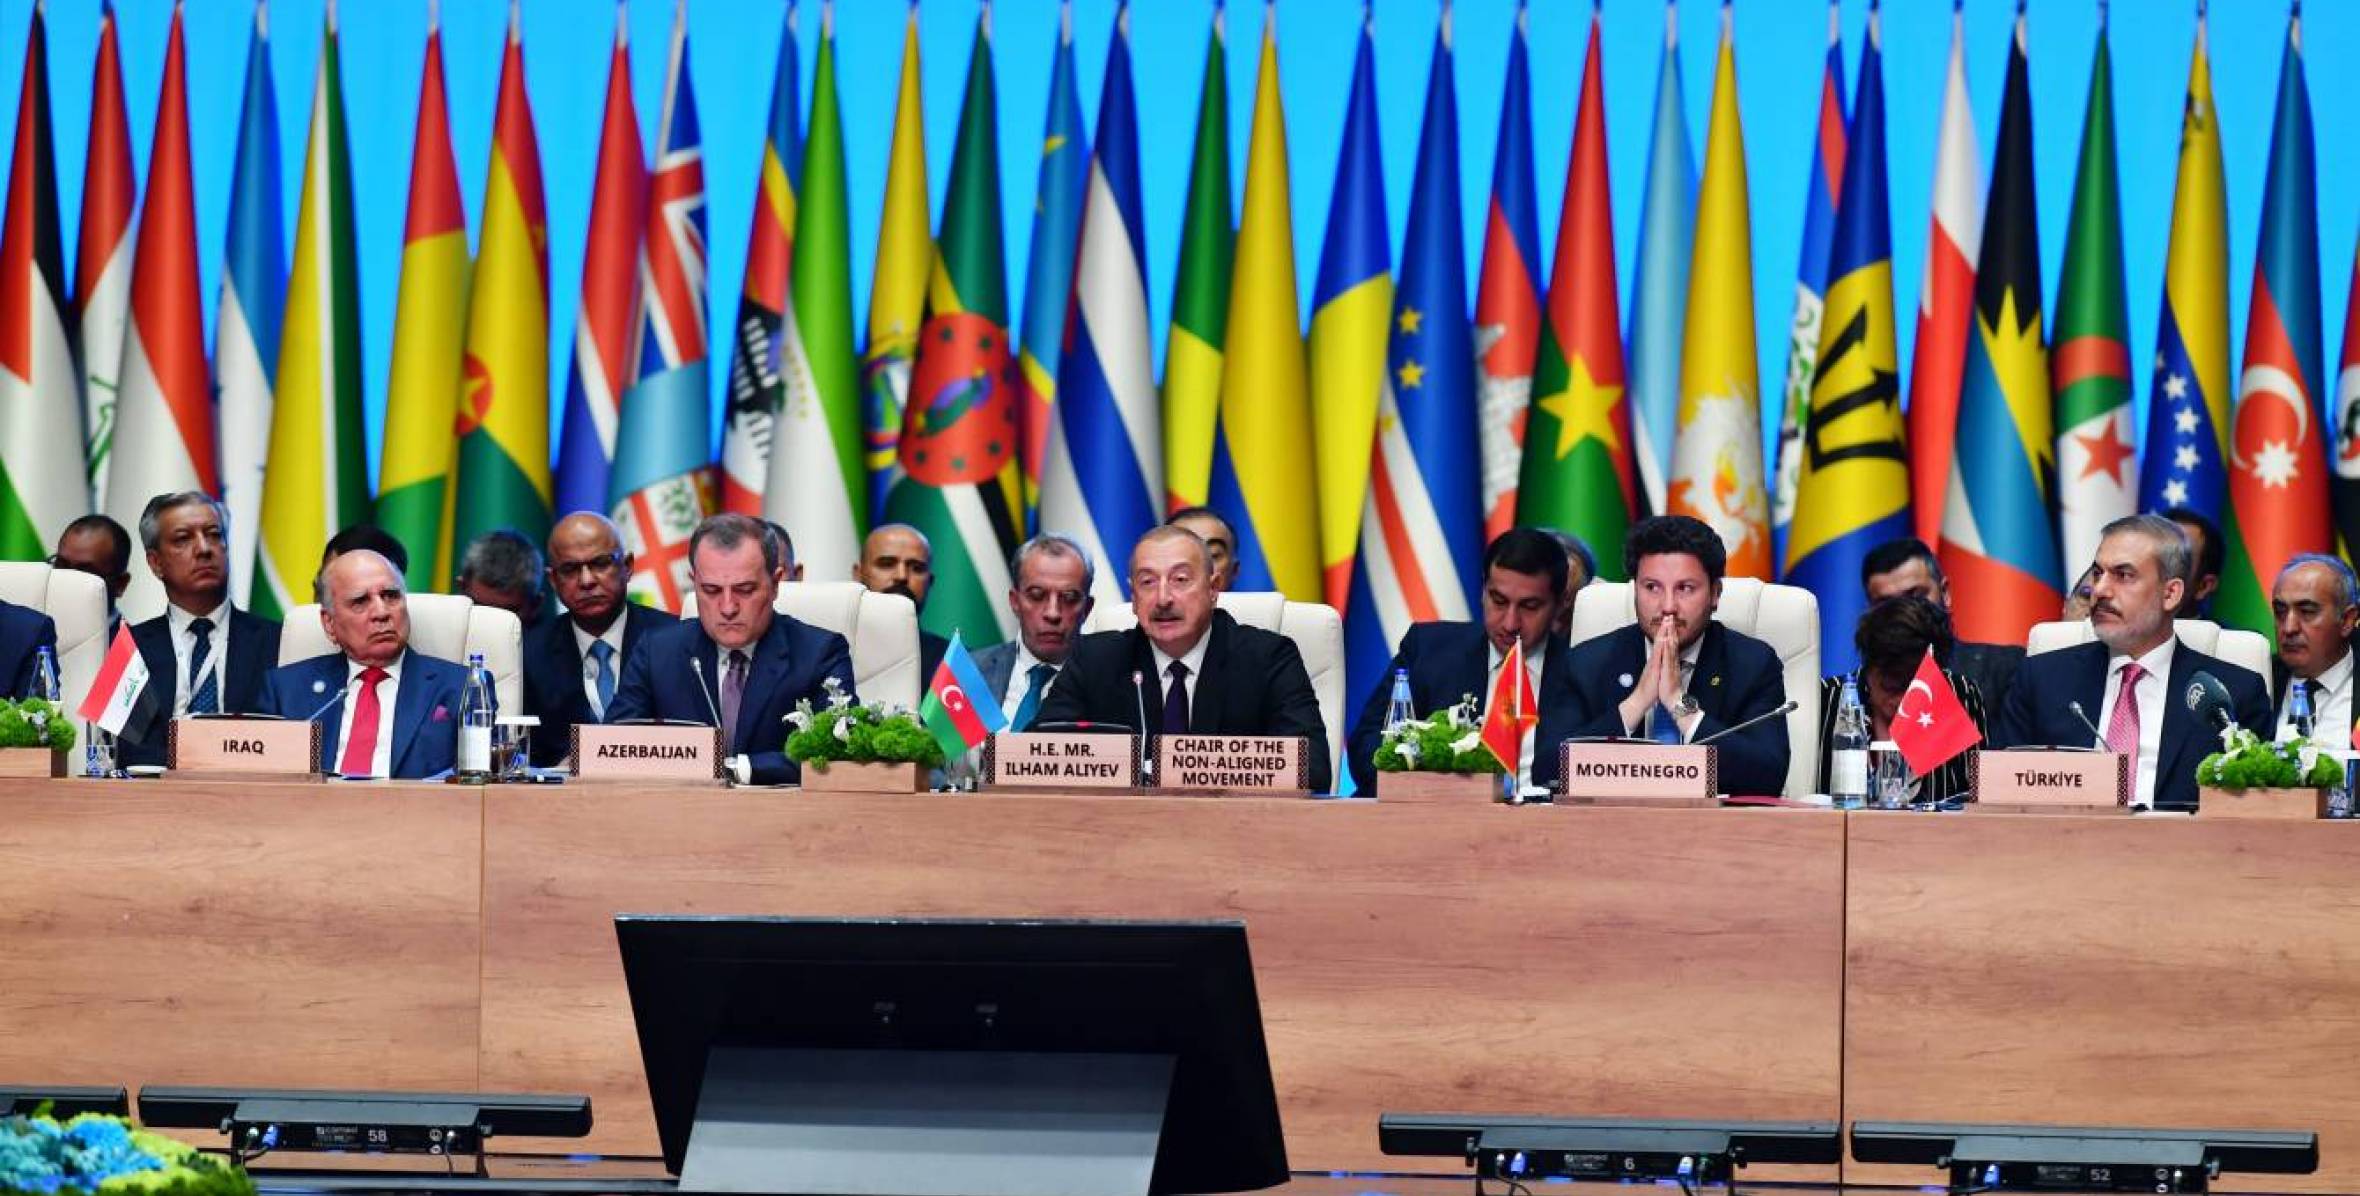 Speech by Ilham Aliyev at the Ministerial Meeting of NAM Coordinating Bureau